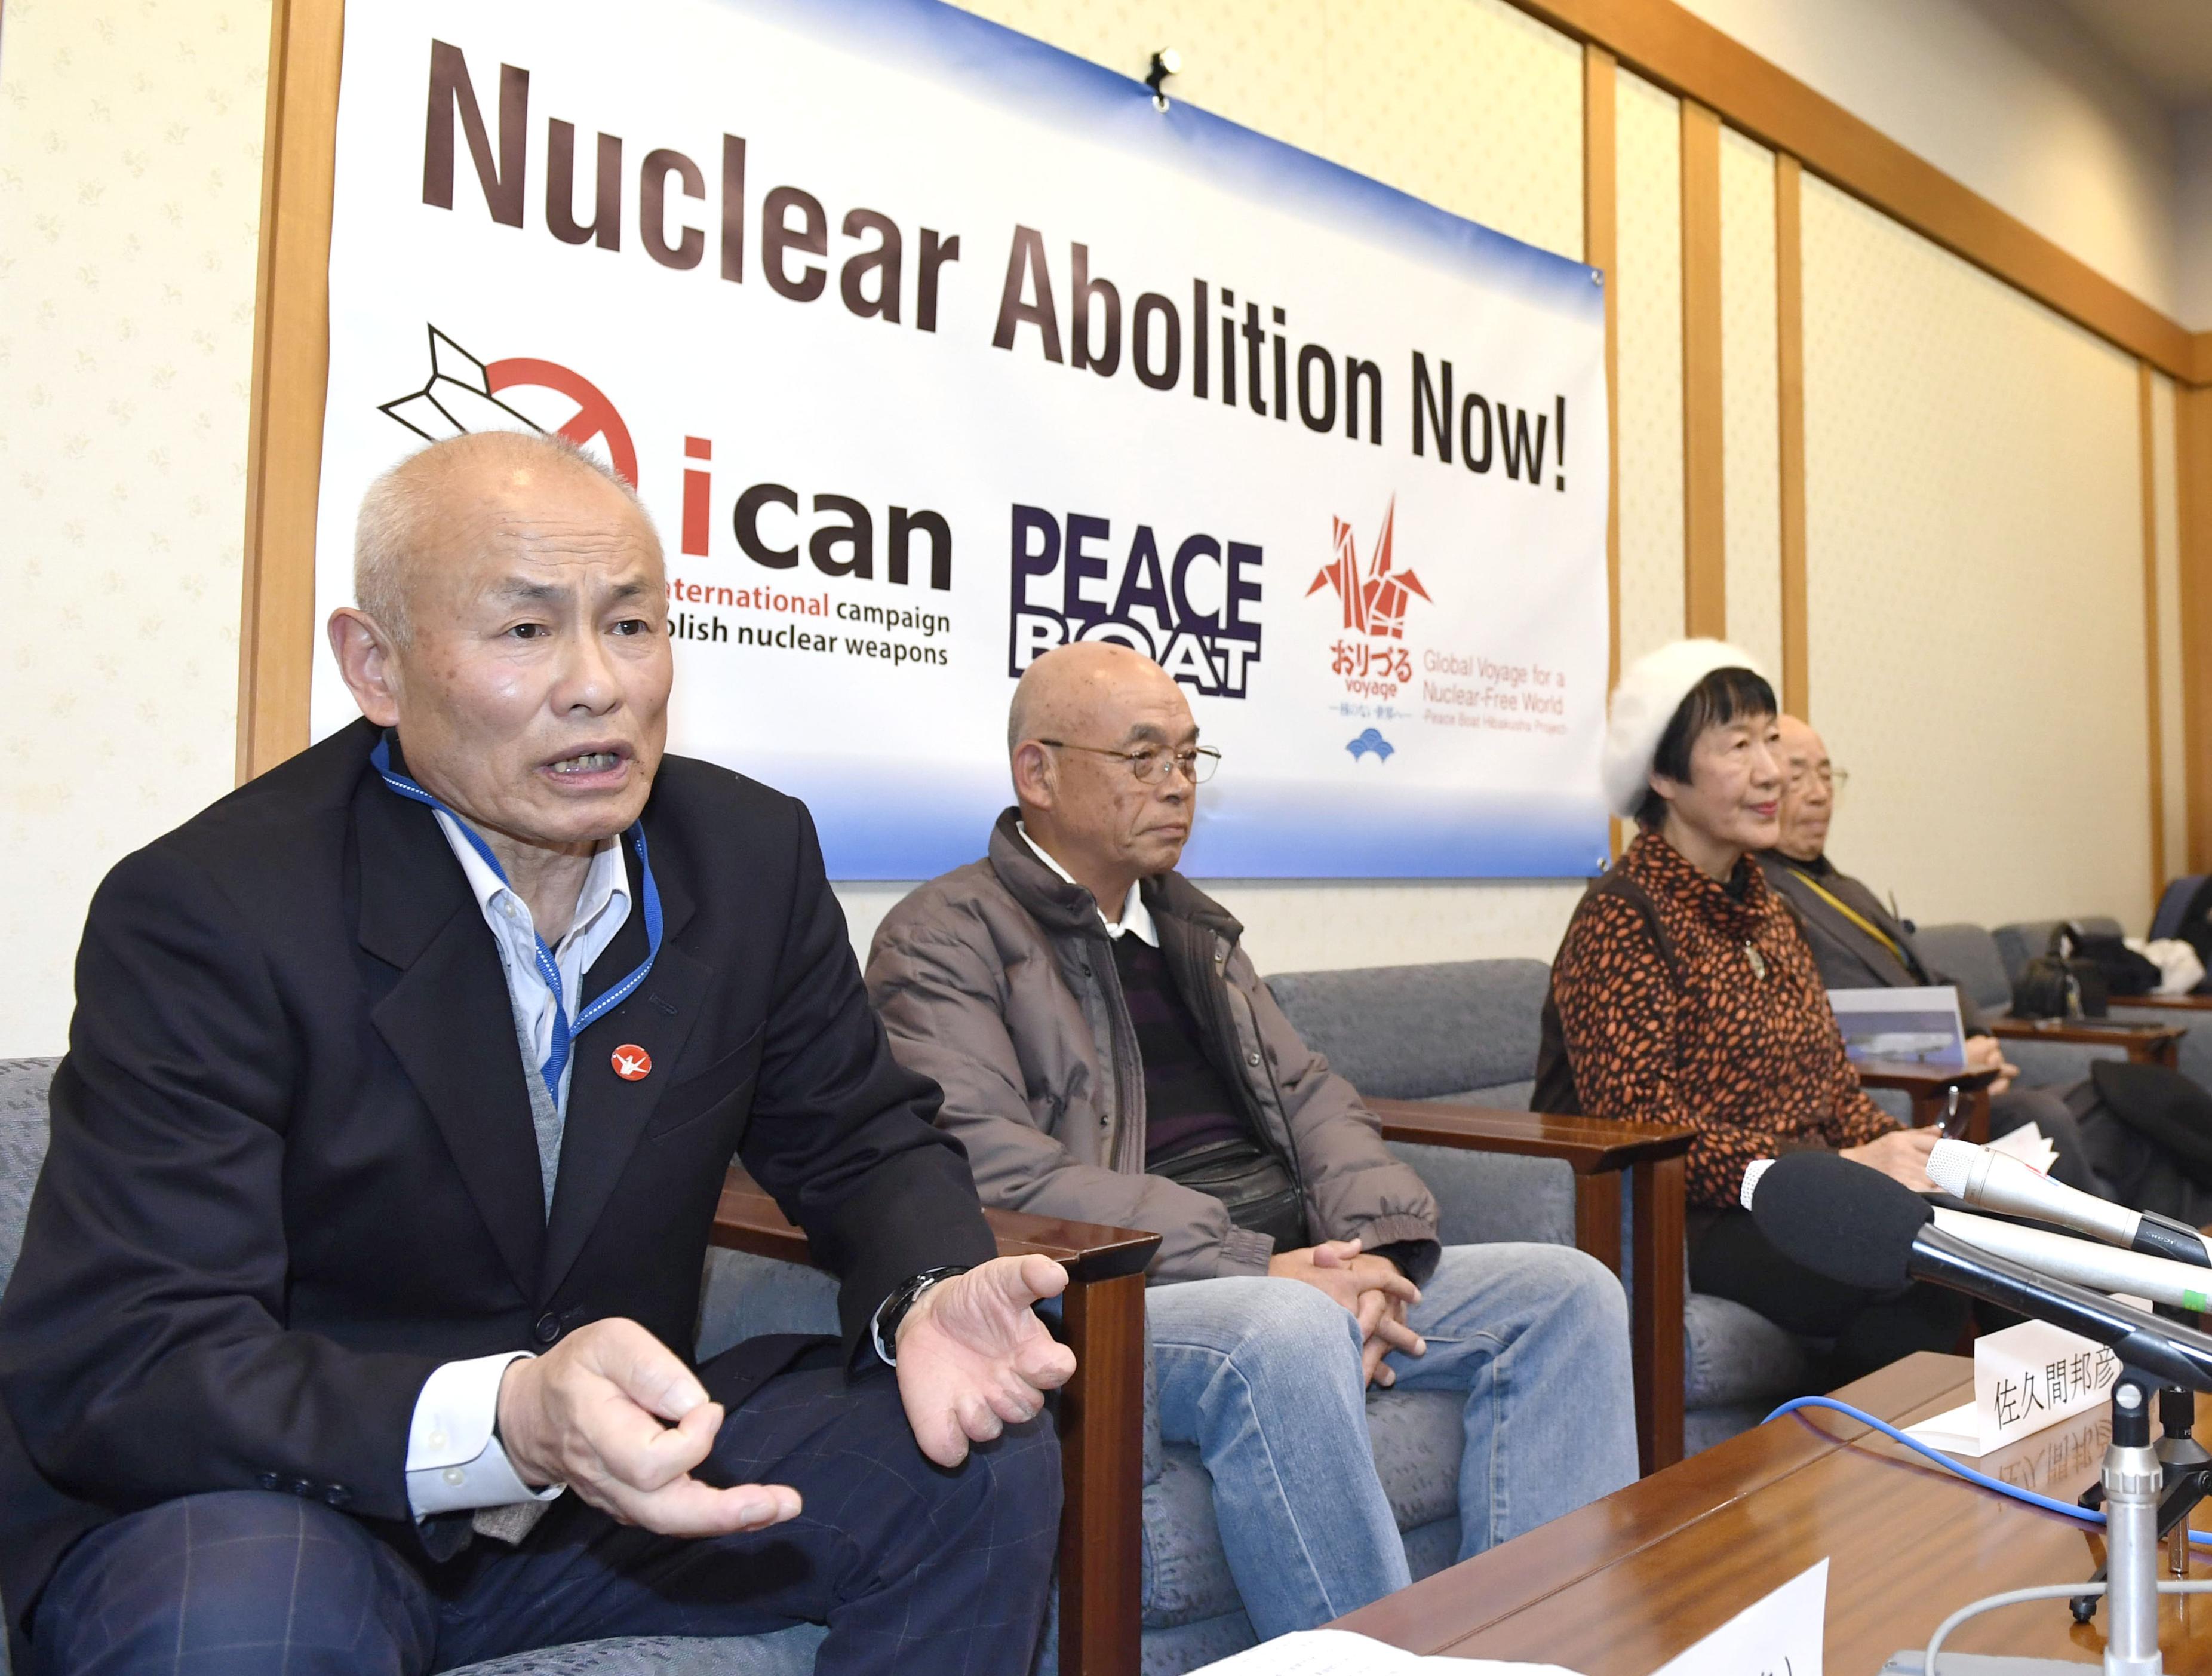 Kunihiko Sakuma (2nd from L) and Toshiyuki Mimaki (L), representatives of groups for victims and families of the 1945 U.S. atomic bombing of Hiroshima, meet the press at Narita airport near Tokyo on Dec. 7, 2017, before leaving for Oslo where the Nobel Peace Prize Award Ceremony will be held on Dec. 10. (Kyodo)
==Kyodo